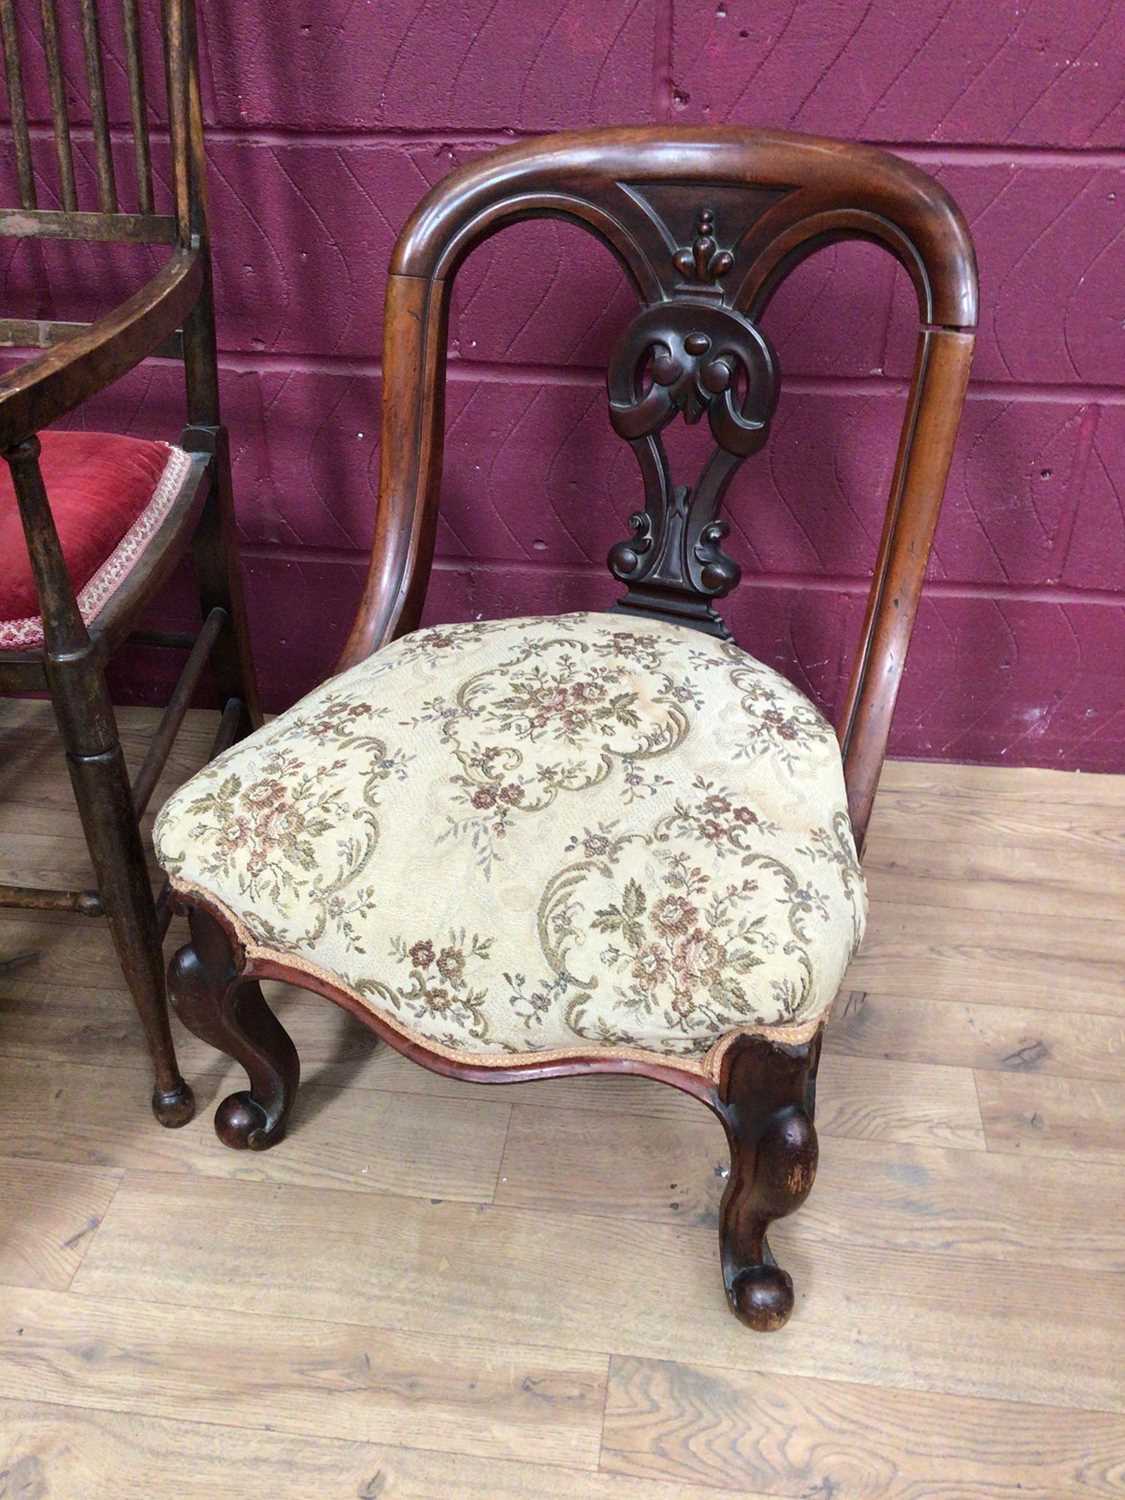 Victorian childs chair, together with two Victorian chairs, Mackintosh style stick back chair - Image 2 of 5